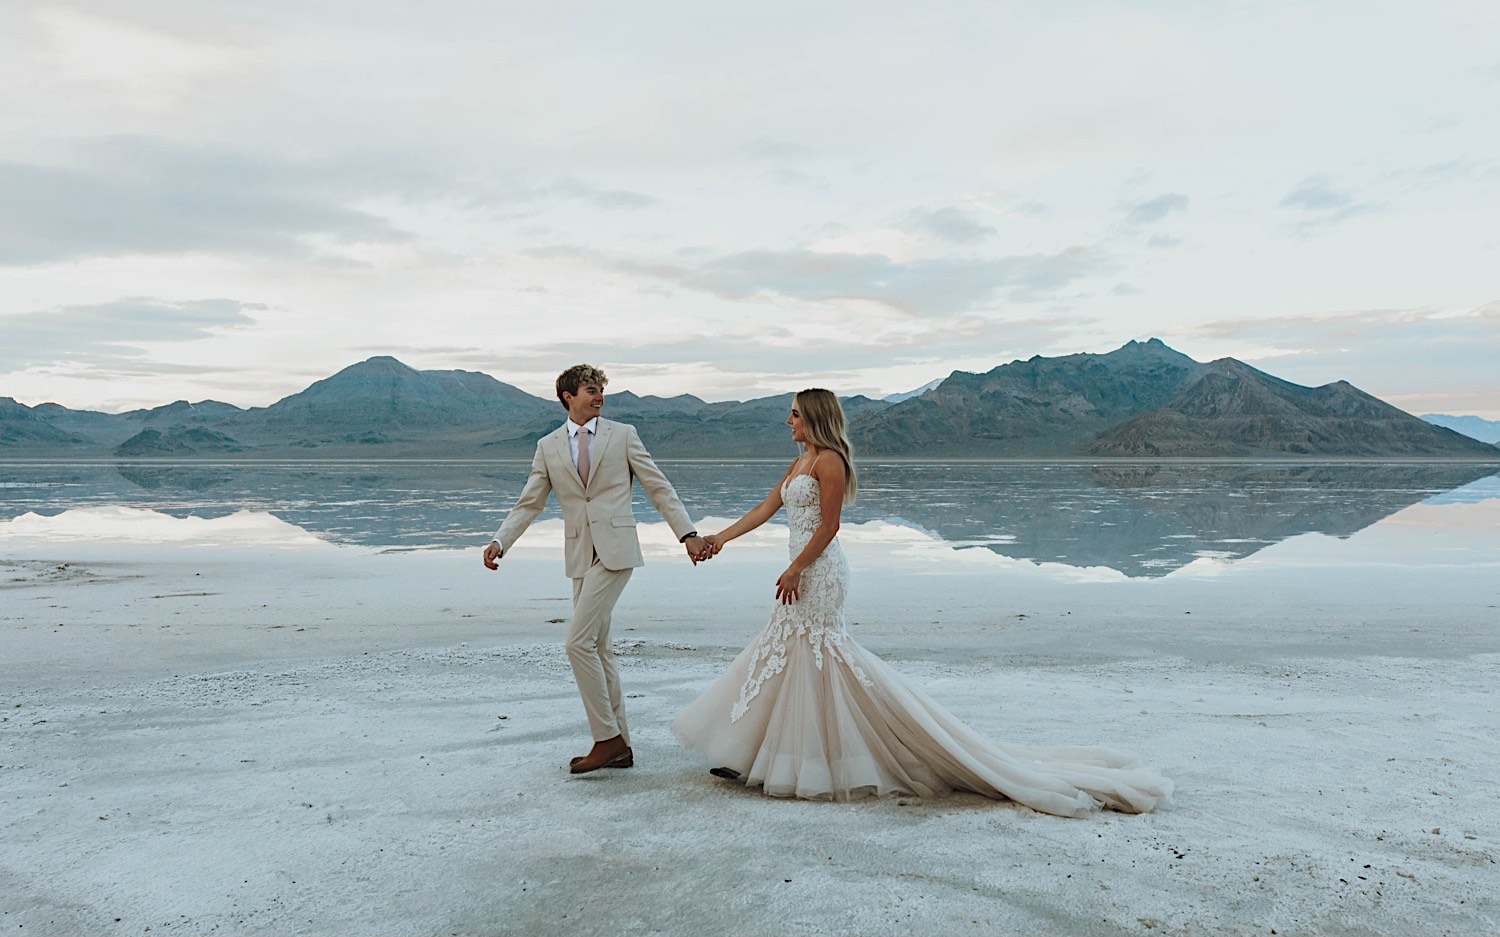 In the Utah Salt Flats, a bride is led by her hand by a groom who smiles back at her during their elopement day with the mountains behind them